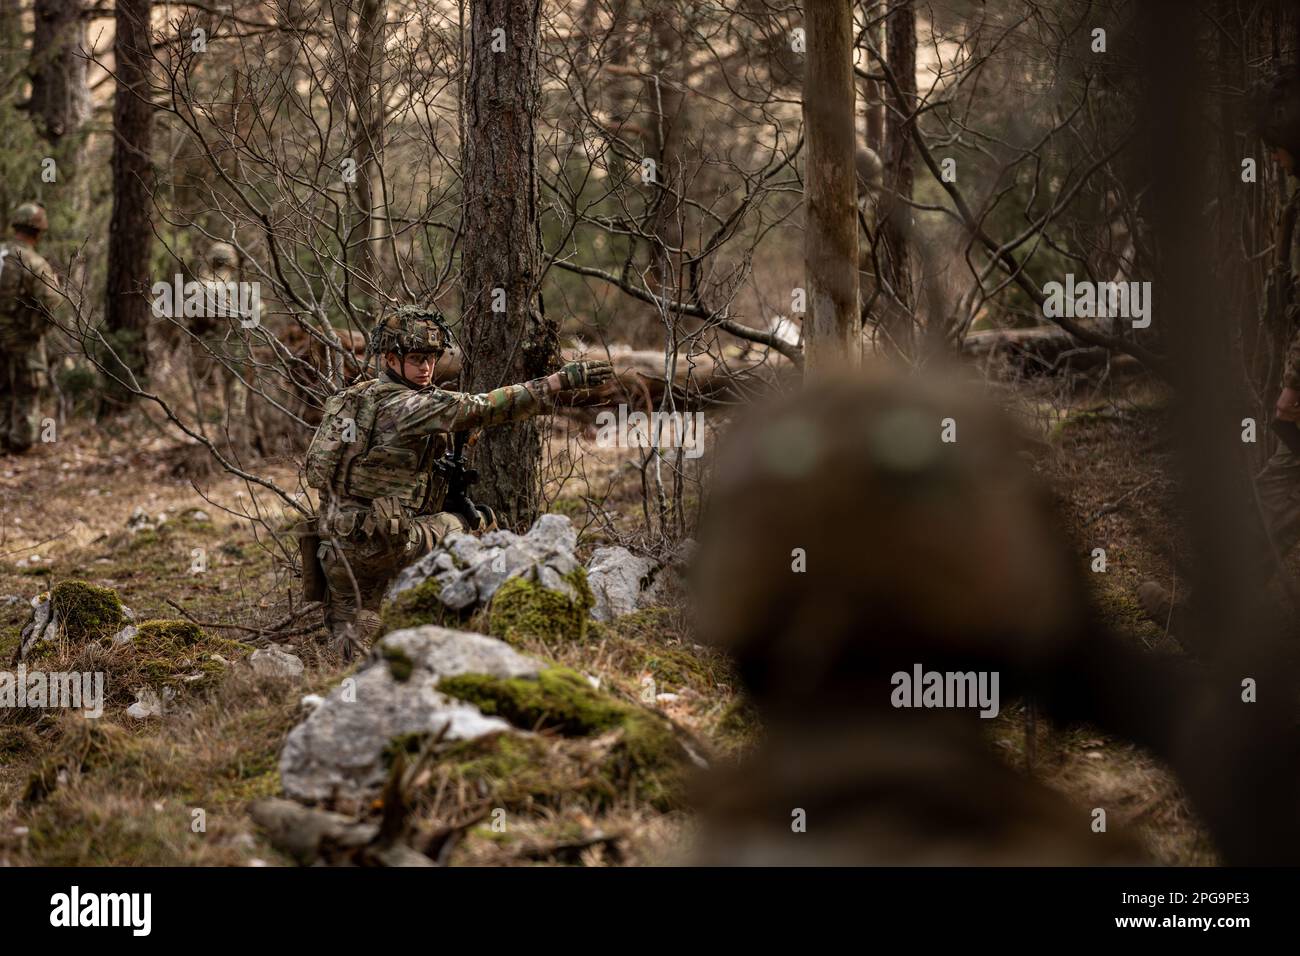 Postojna, Slovenia. 15th Mar, 2023. Infantry soldiers assigned to Battle Company, 2nd Battalion, 503rd Airborne Infantry Regiment, 173rd Airborne Brigade, prepare to step off and conduct squad live-fire and tactical movement training at PoÄek Range in Postojna, Slovenia, Mar. 15, 2023. The 173rd Airborne Brigade is the U.S. Army Contingency Response Force in Europe, capable of projecting ready forces anywhere in the U.S. European, Africa or Central Commands' areas of responsibility. Credit: U.S. Army/ZUMA Press Wire Service/ZUMAPRESS.com/Alamy Live News Stock Photo